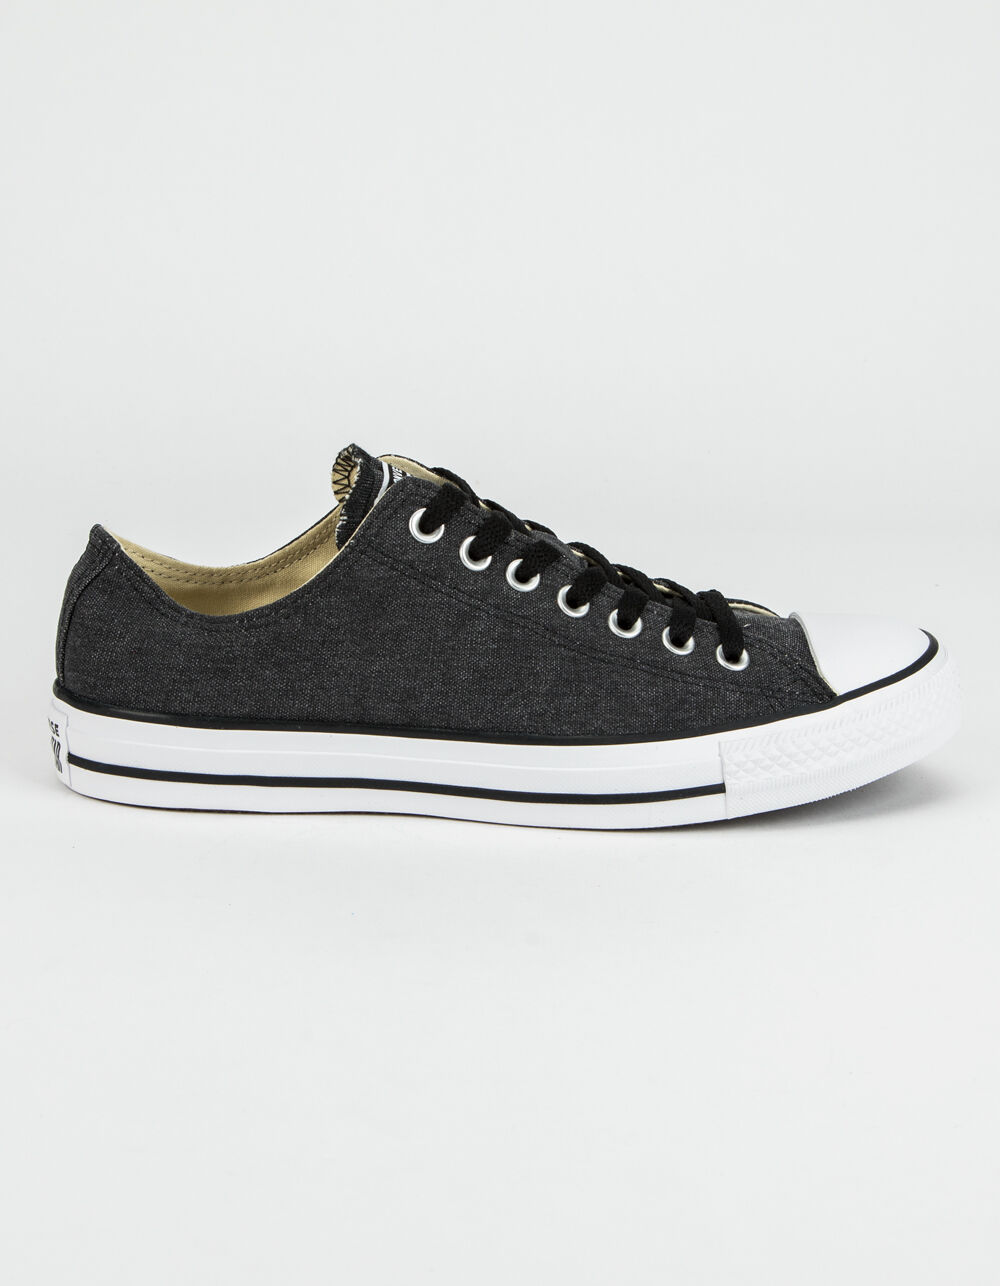 CONVERSE Chuck Taylor All Star Black & White Low Top Shoes - BLACK ...